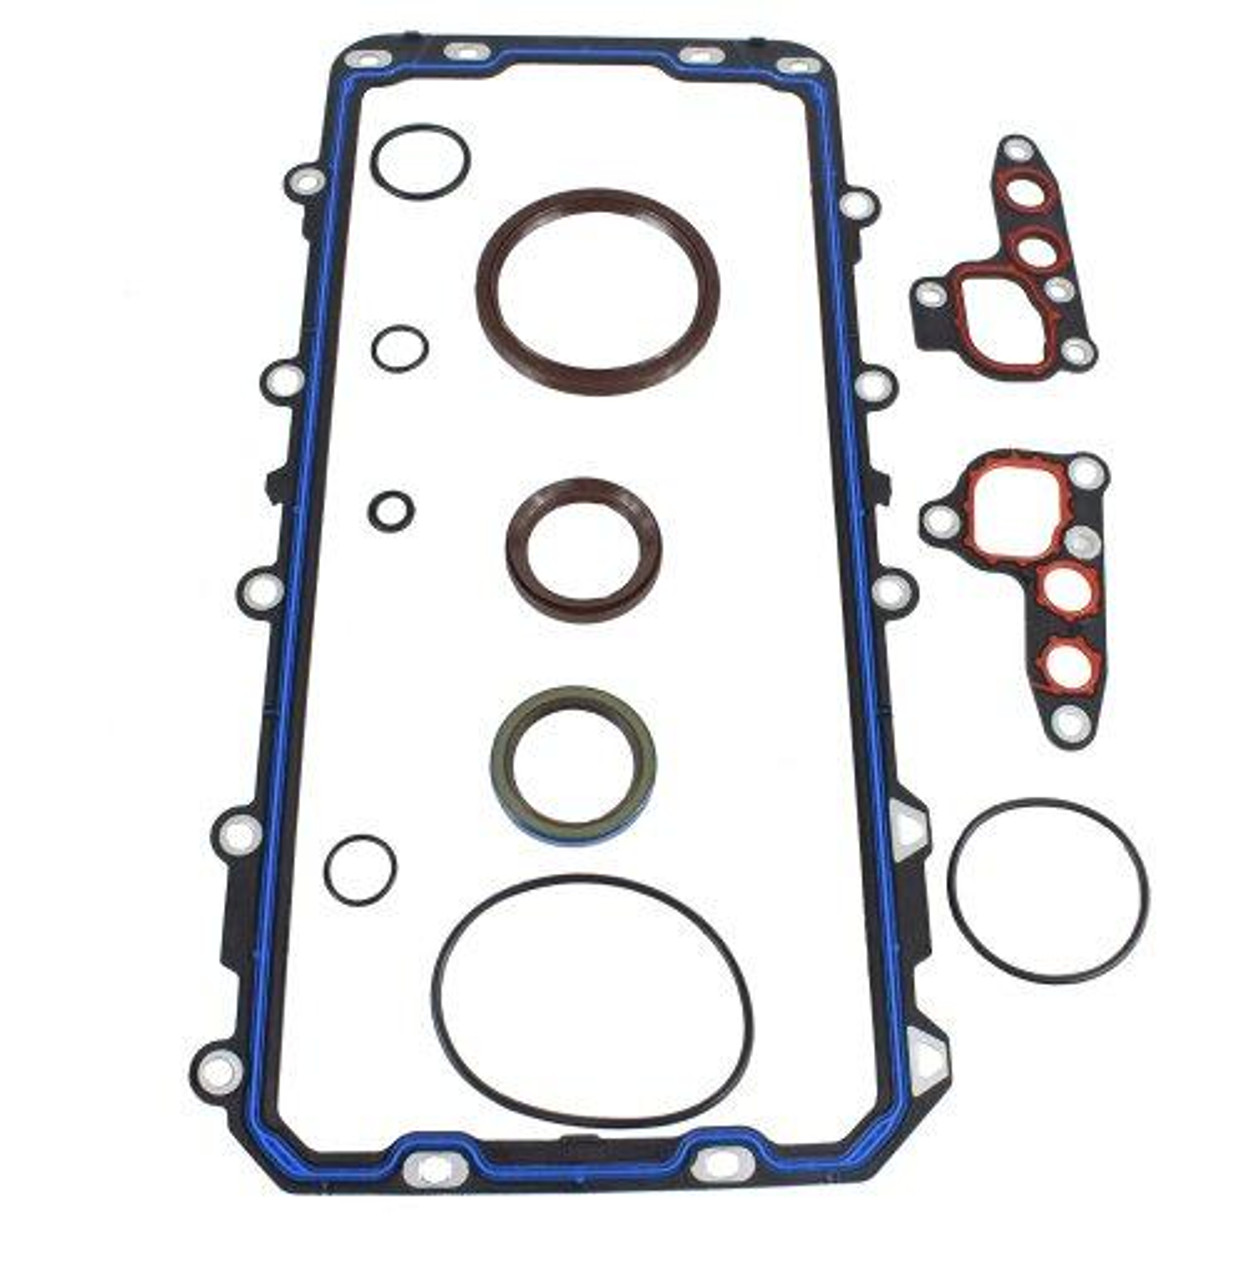 Lower Gasket Set - 1999 Ford Expedition 5.4L Engine Parts # LGS4150ZE158